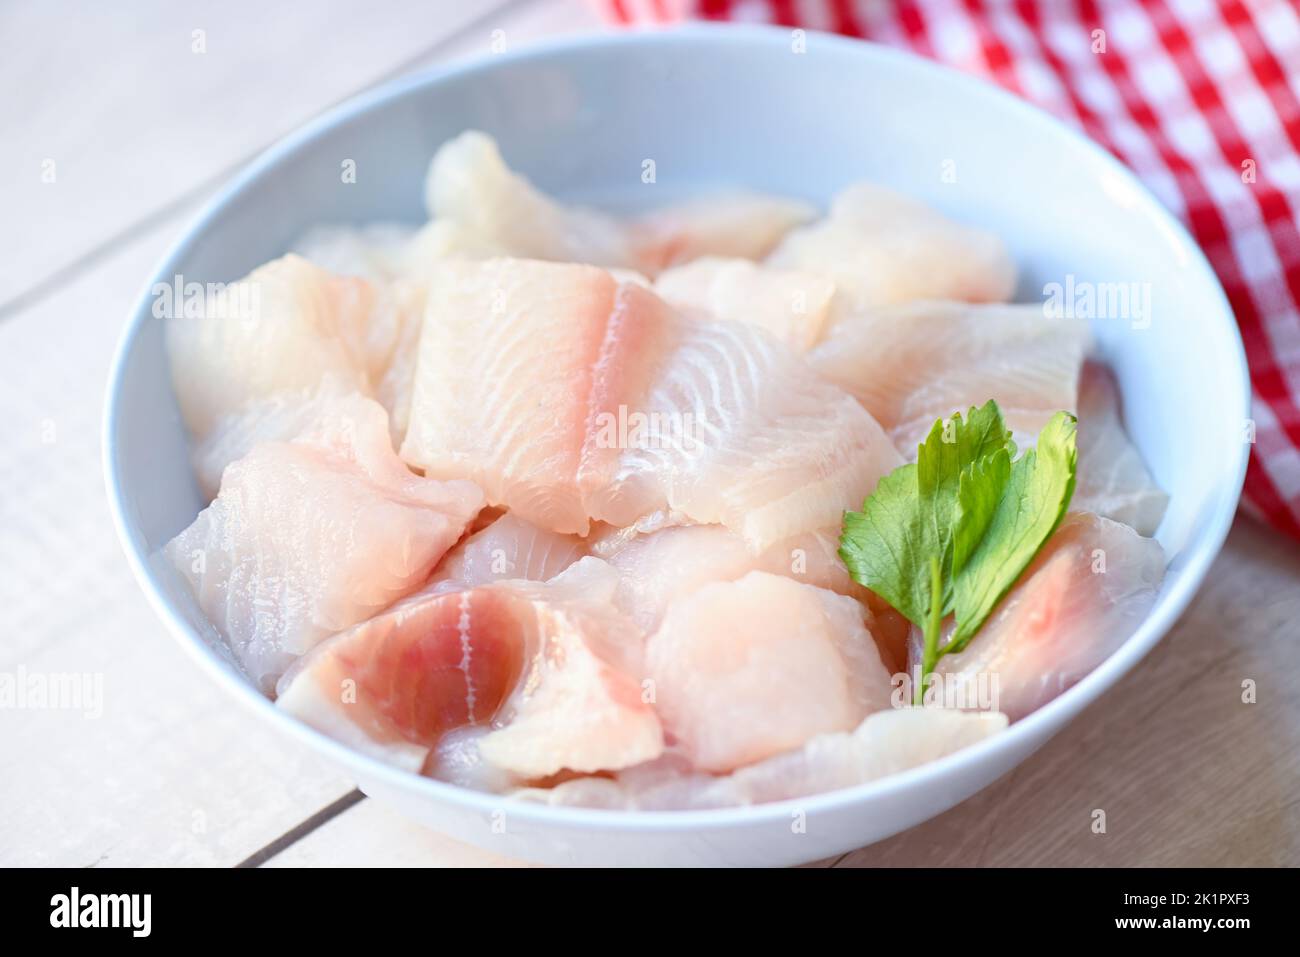 fresh raw pangasius fish fillet with, meat dolly fish tilapia striped catfish, fish fillet on bowl for cooking Stock Photo